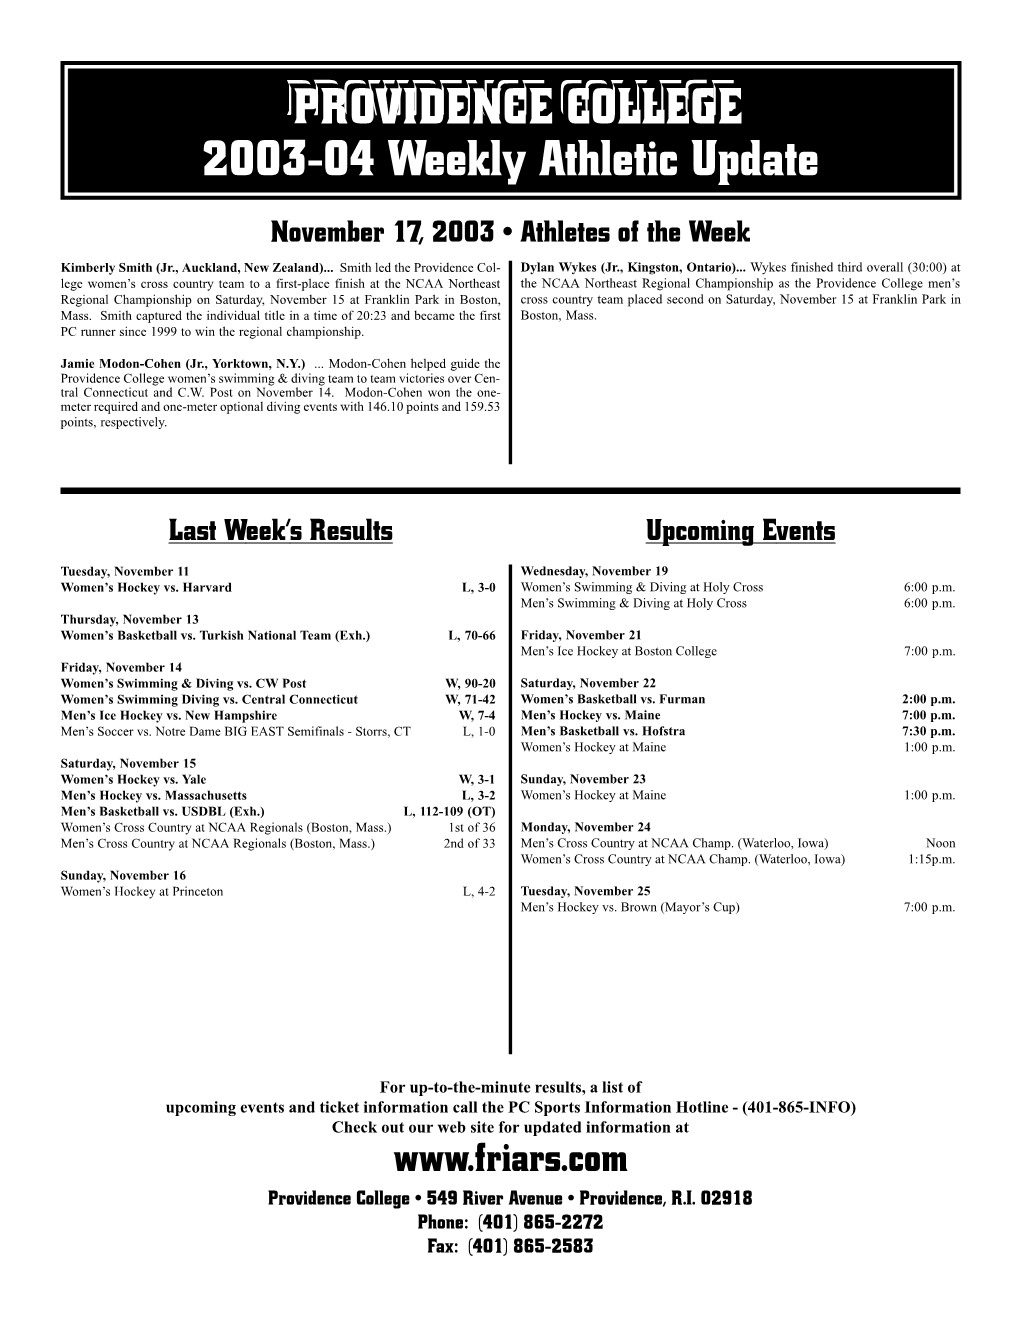 PROVIDENCE COLLEGE 2003-04 Weekly Athletic Update